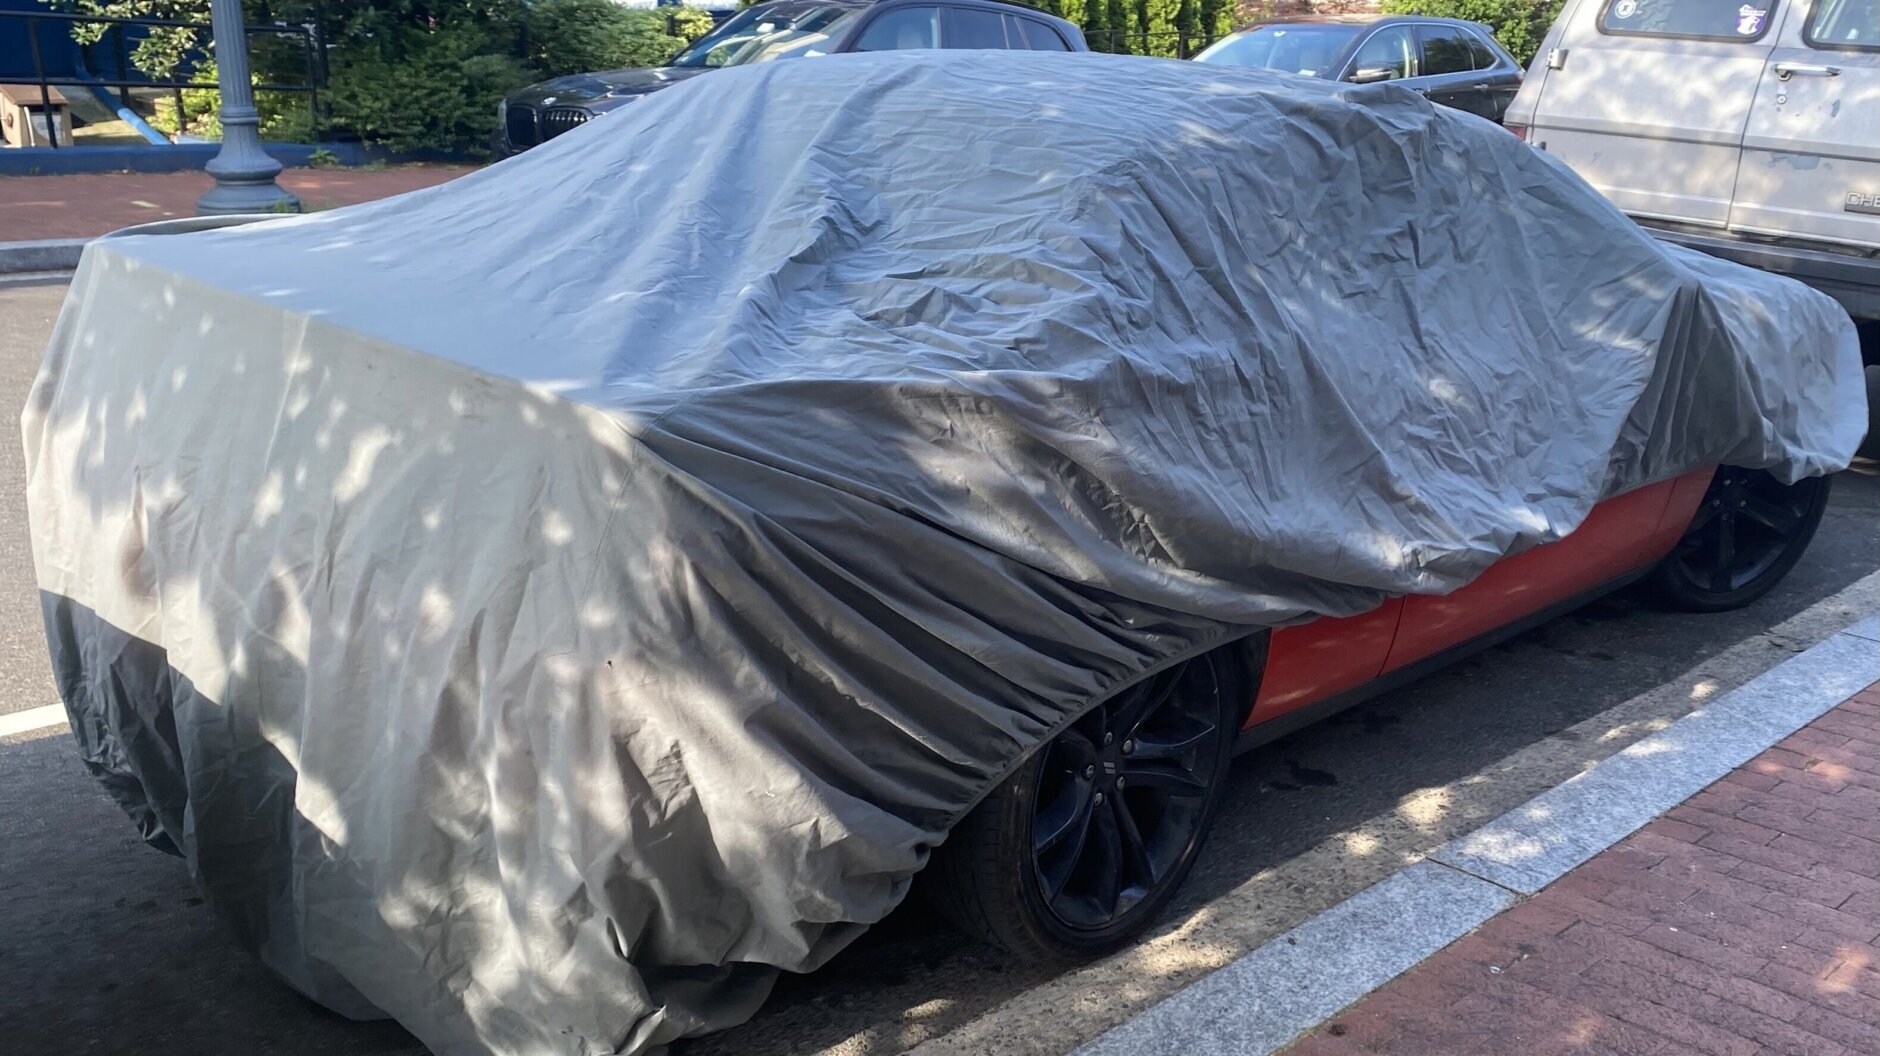 A vehicle with more than 40 unpaid tickets is seen under a cover in Northwest D.C.